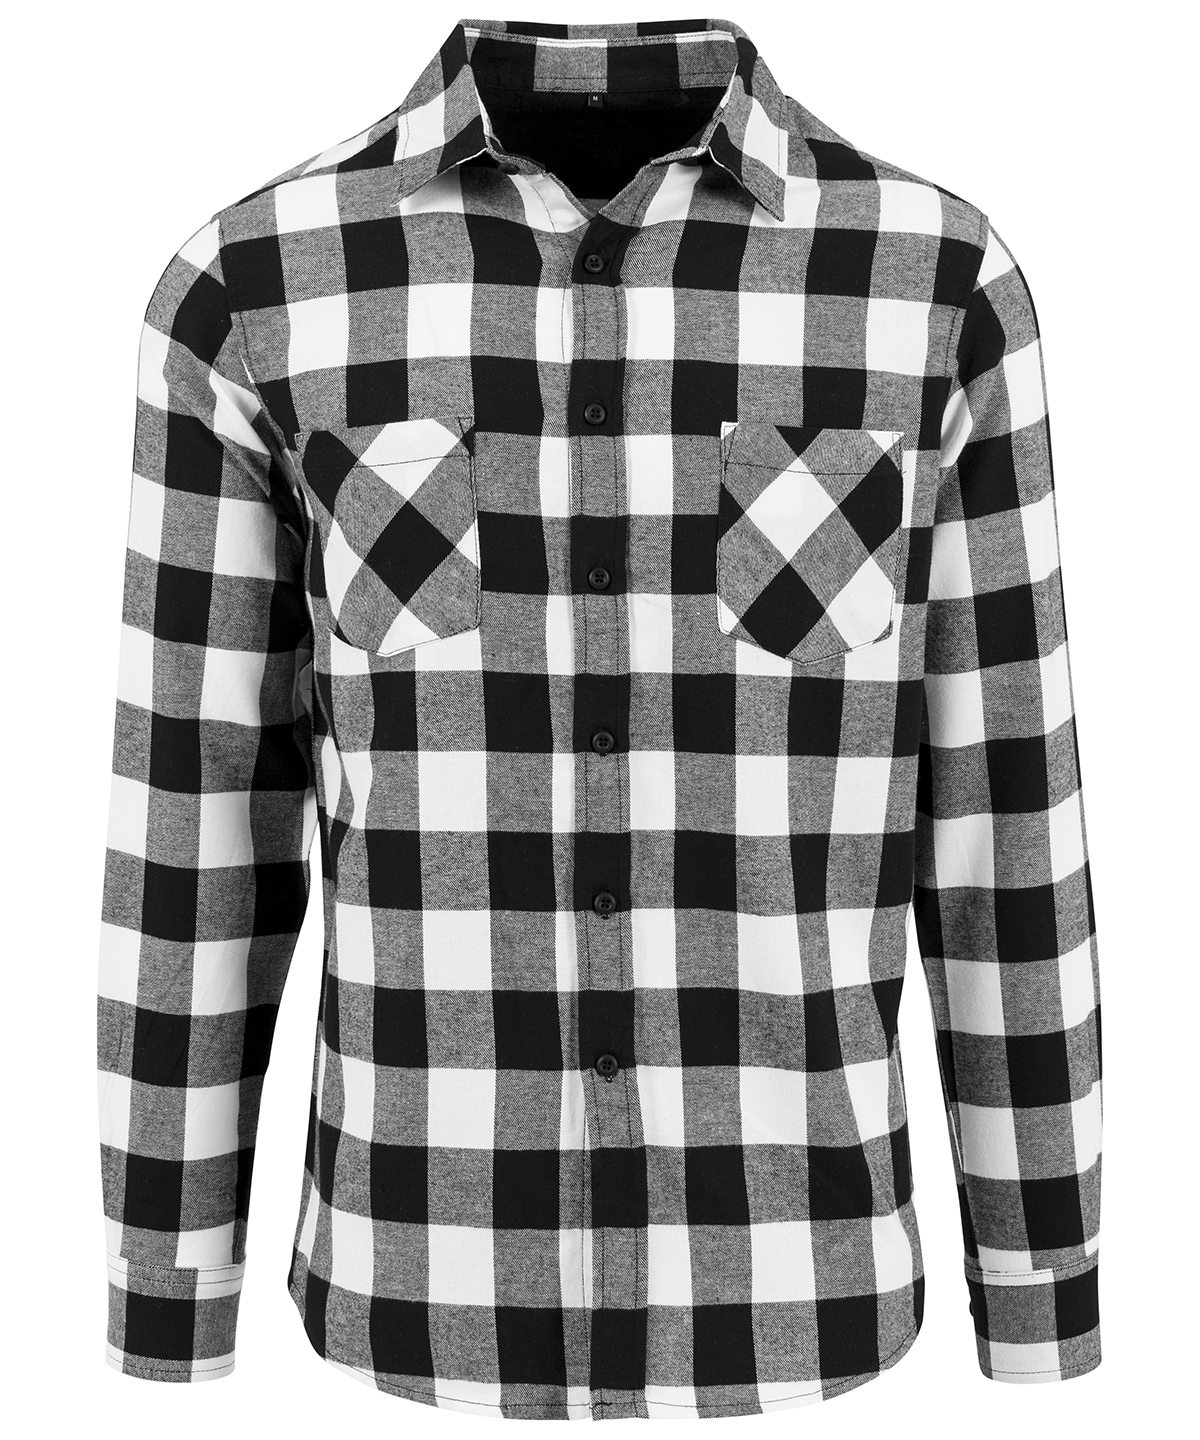 Checked Flannel Shirt Black/White Size 2XLarge